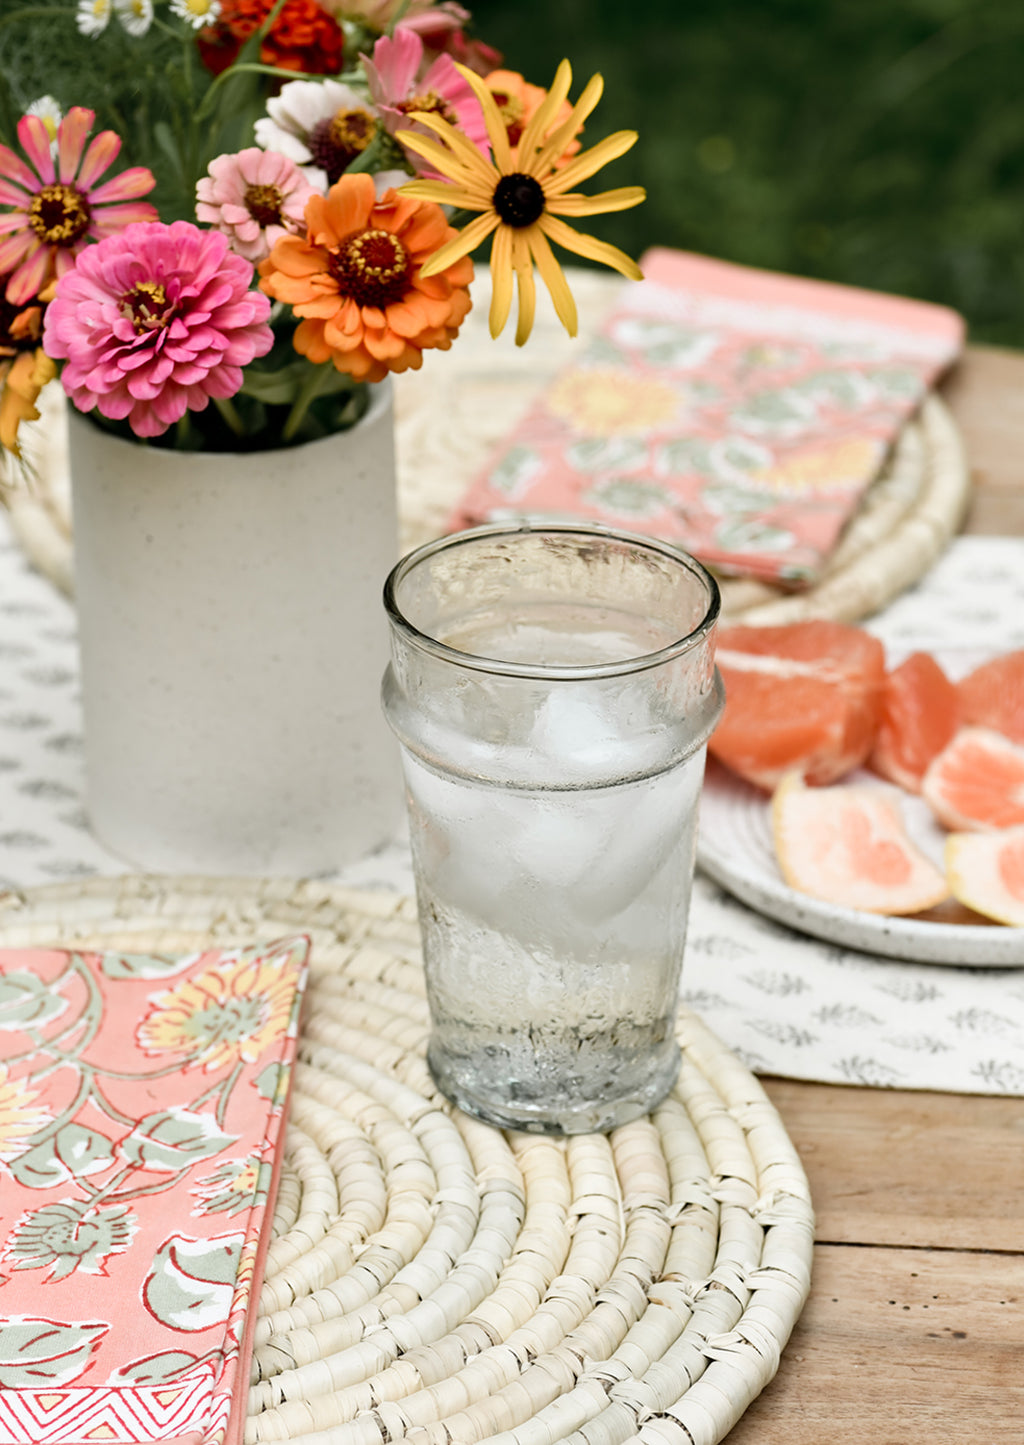 2: A table setting with placemats, napkins and water glass.